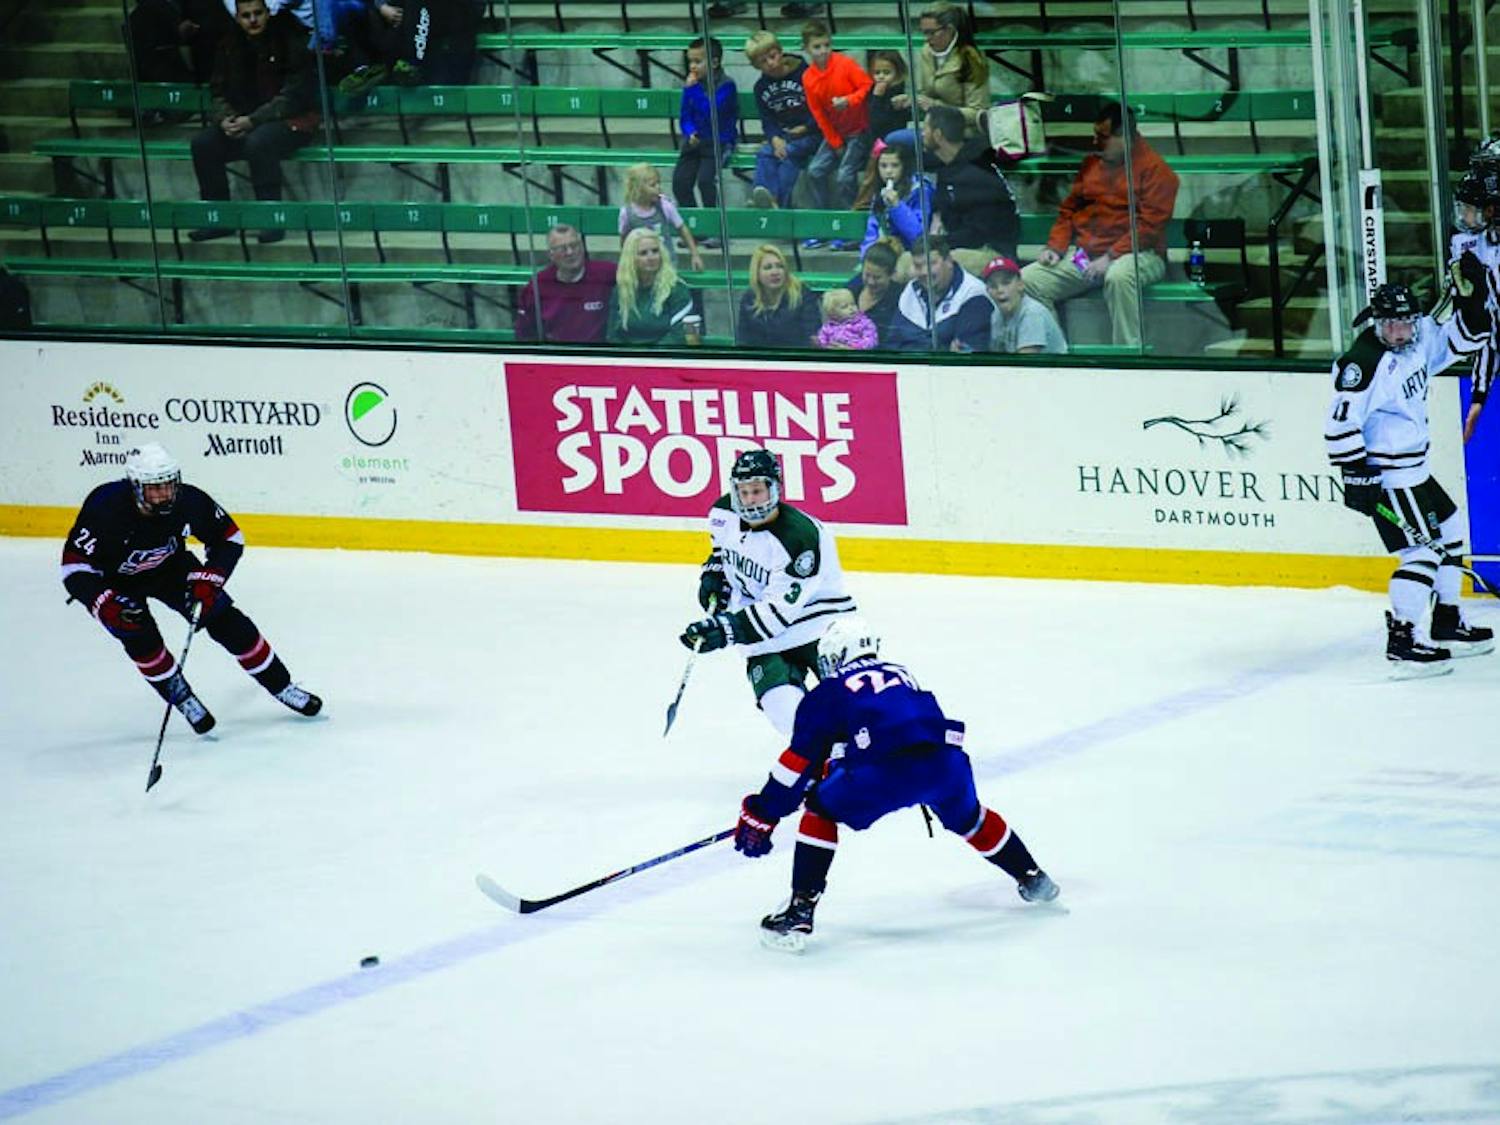 The Dartmouth men's hockey team is off to a solid 4-2-1 start in conference play.